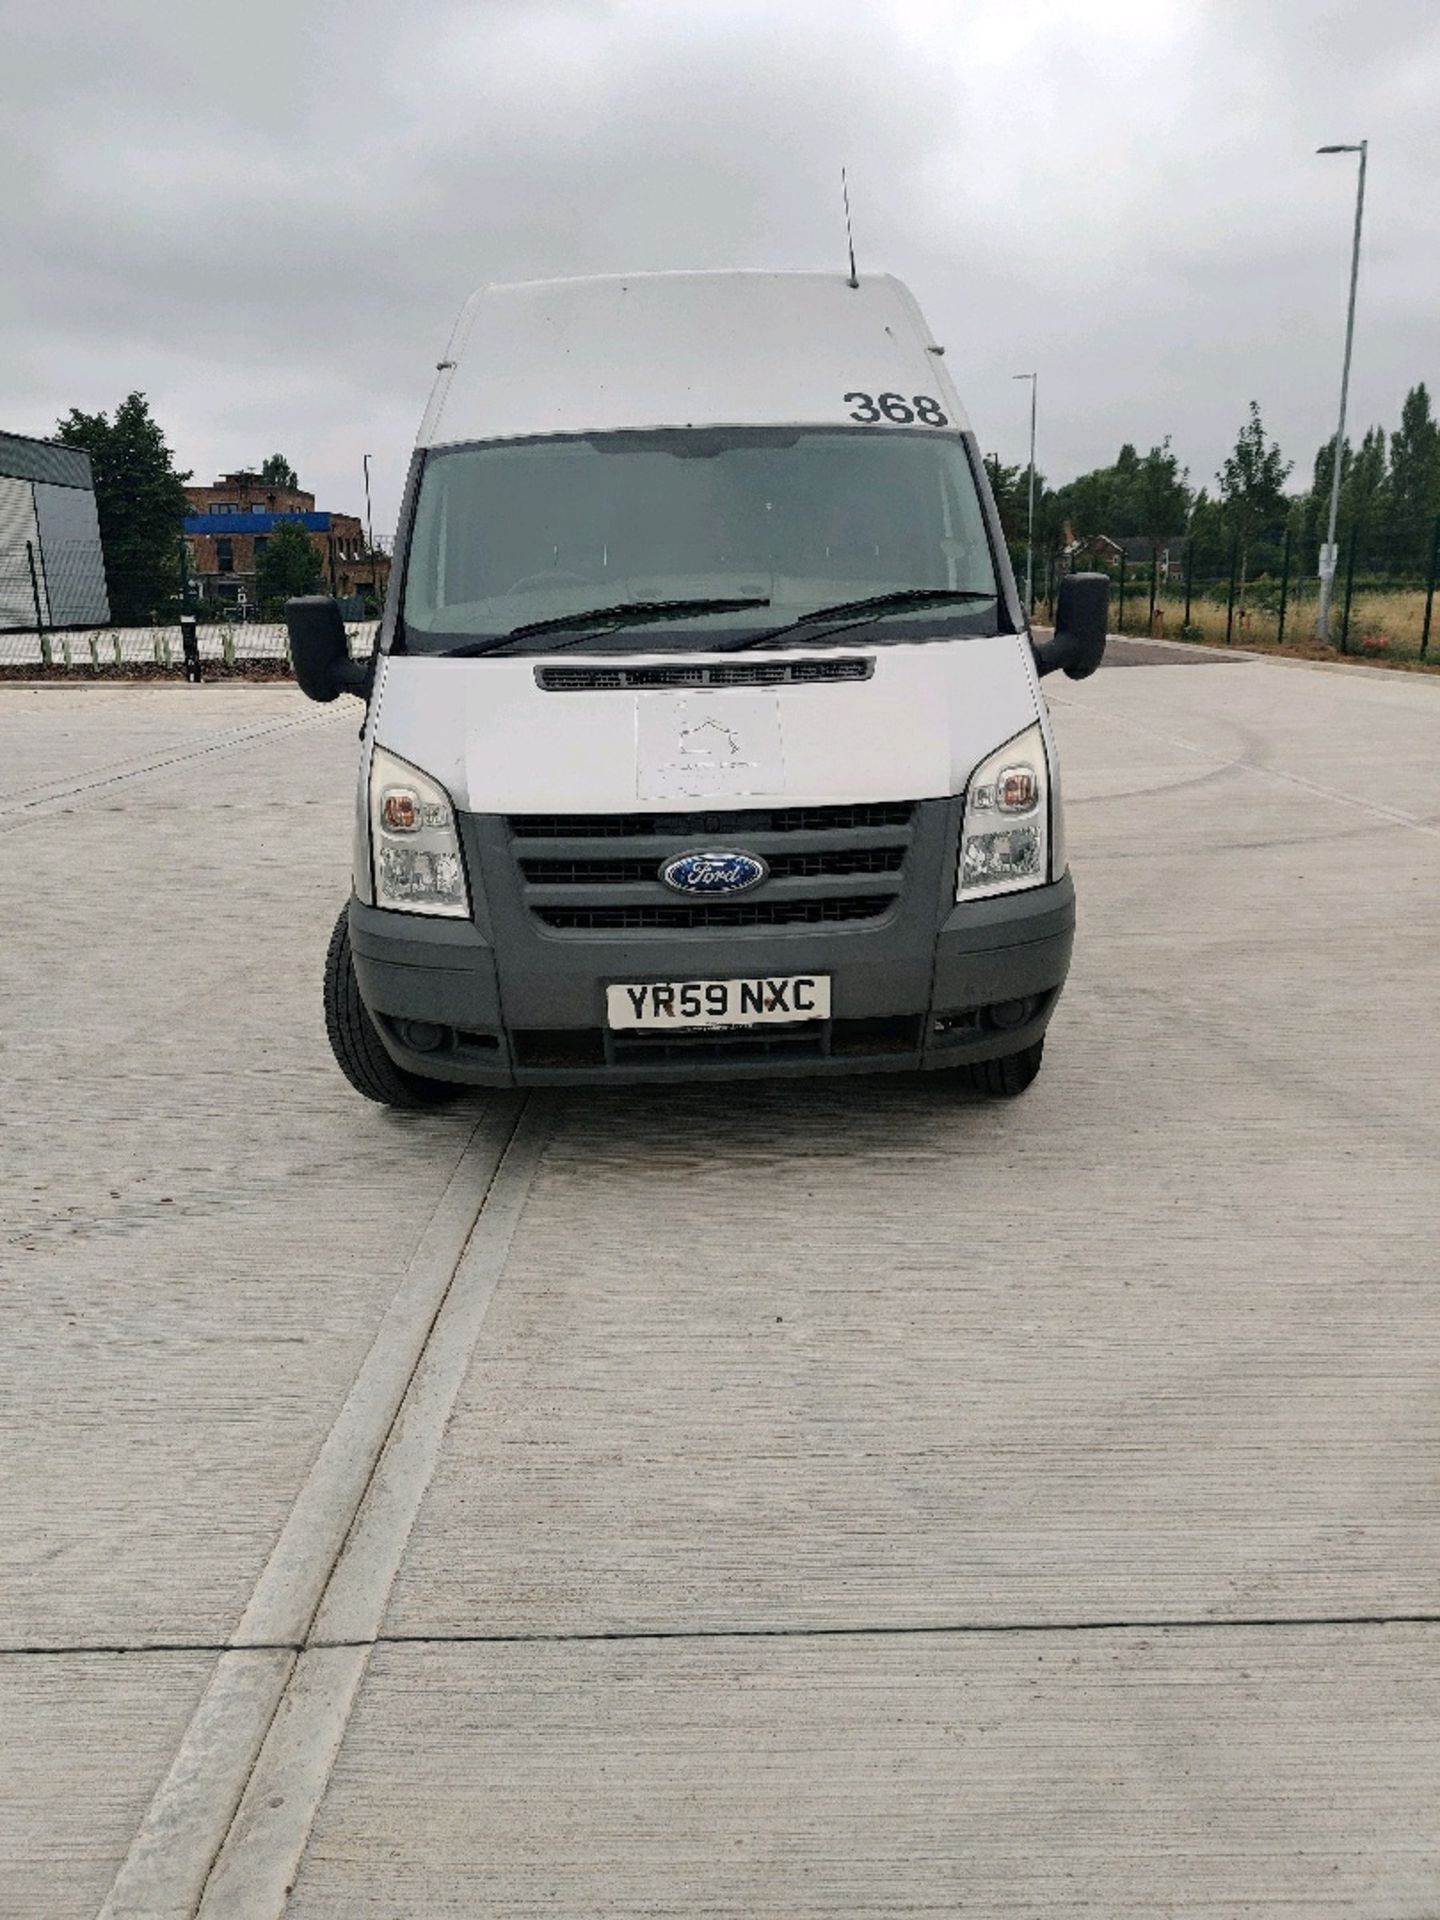 ENTRY DIRECT FROM LOCAL AUTHORITY Ford transit YR59NXC - Image 2 of 21